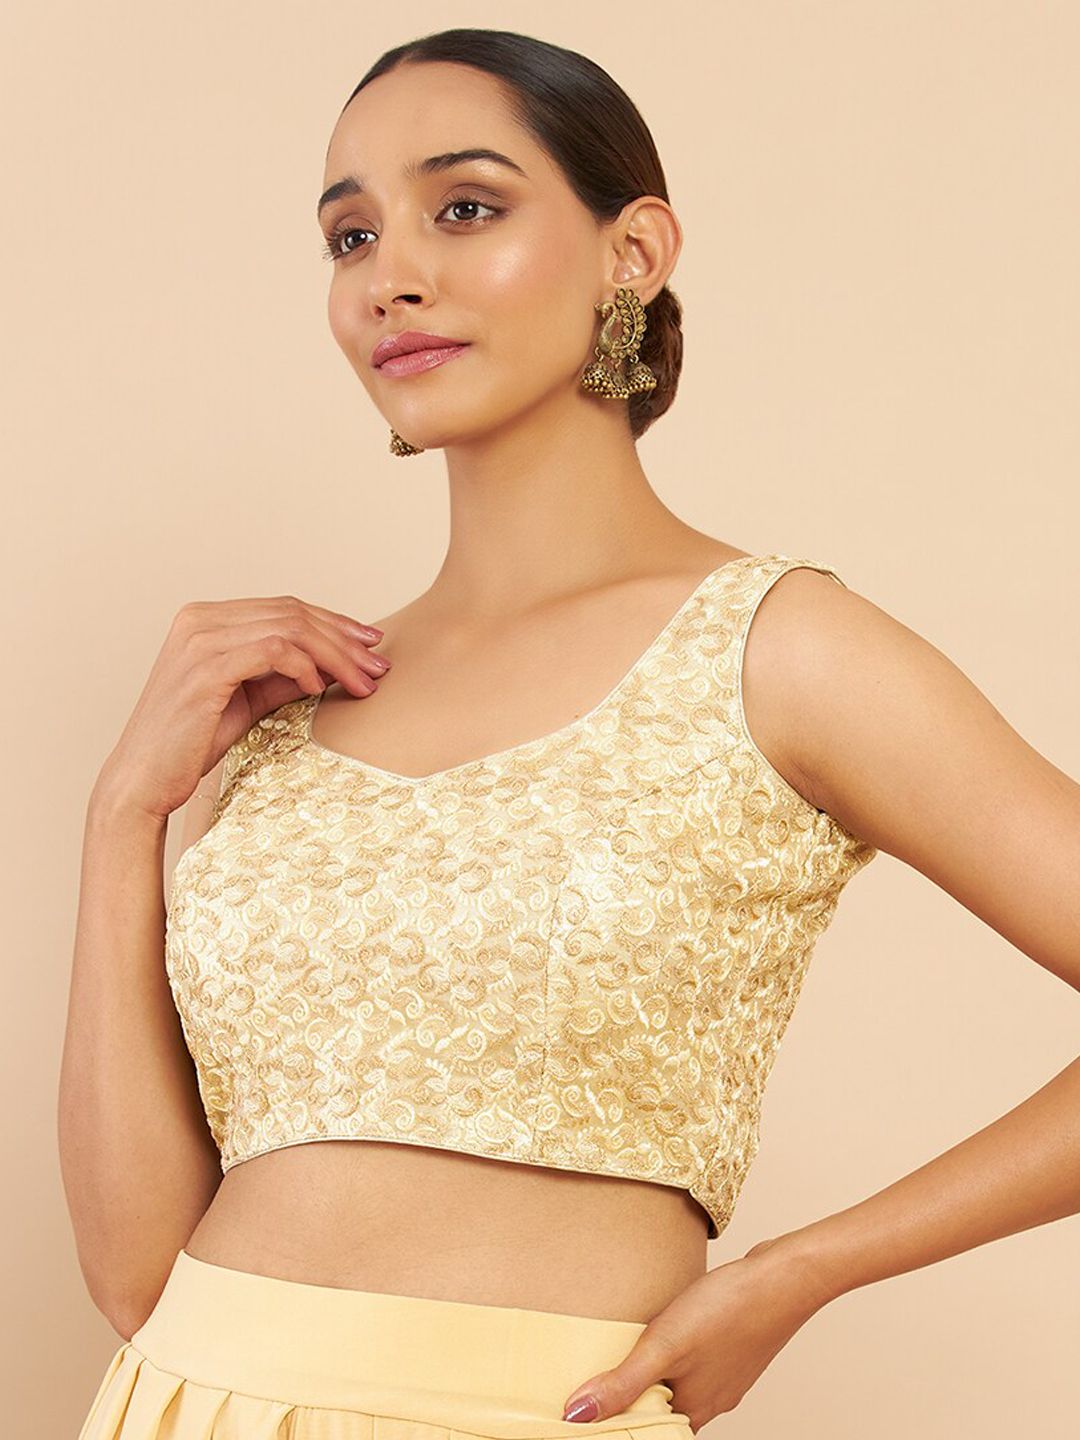 Soch Women Gold-Colored Embroidered Saree Blouse Price in India